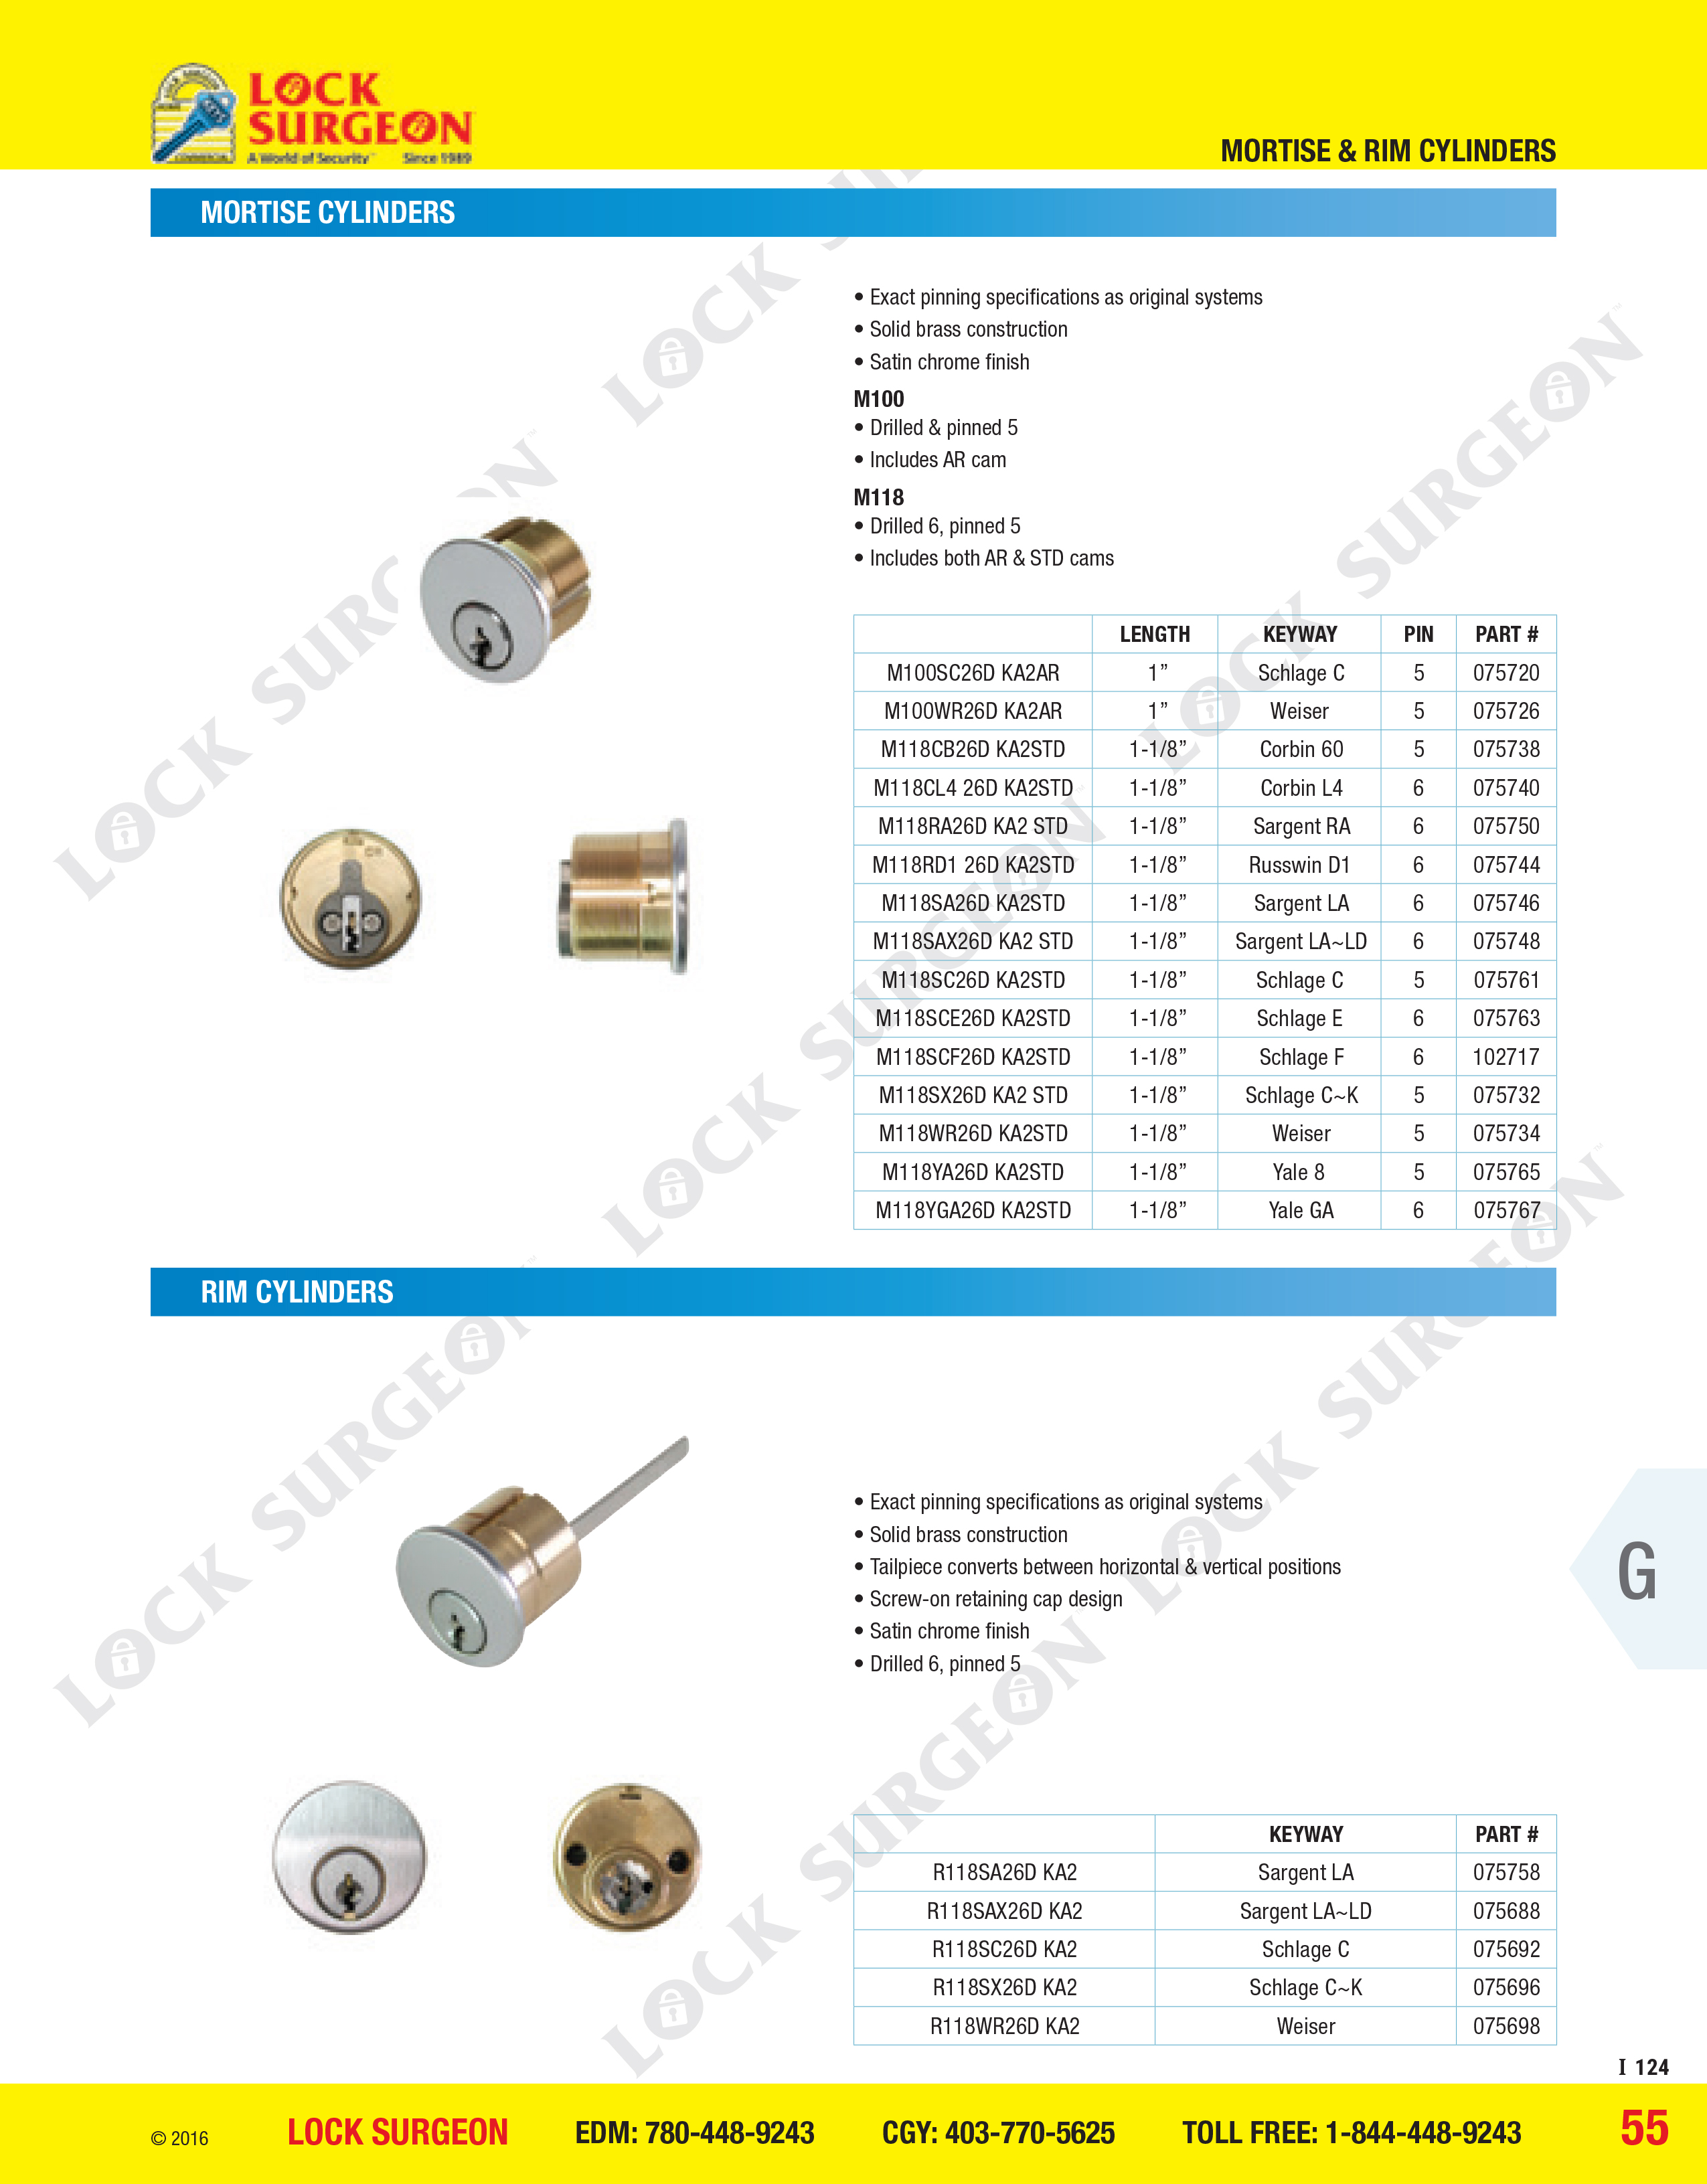 GMS mortise and rim cylinder exact pinning specifications as original systems Acheson.